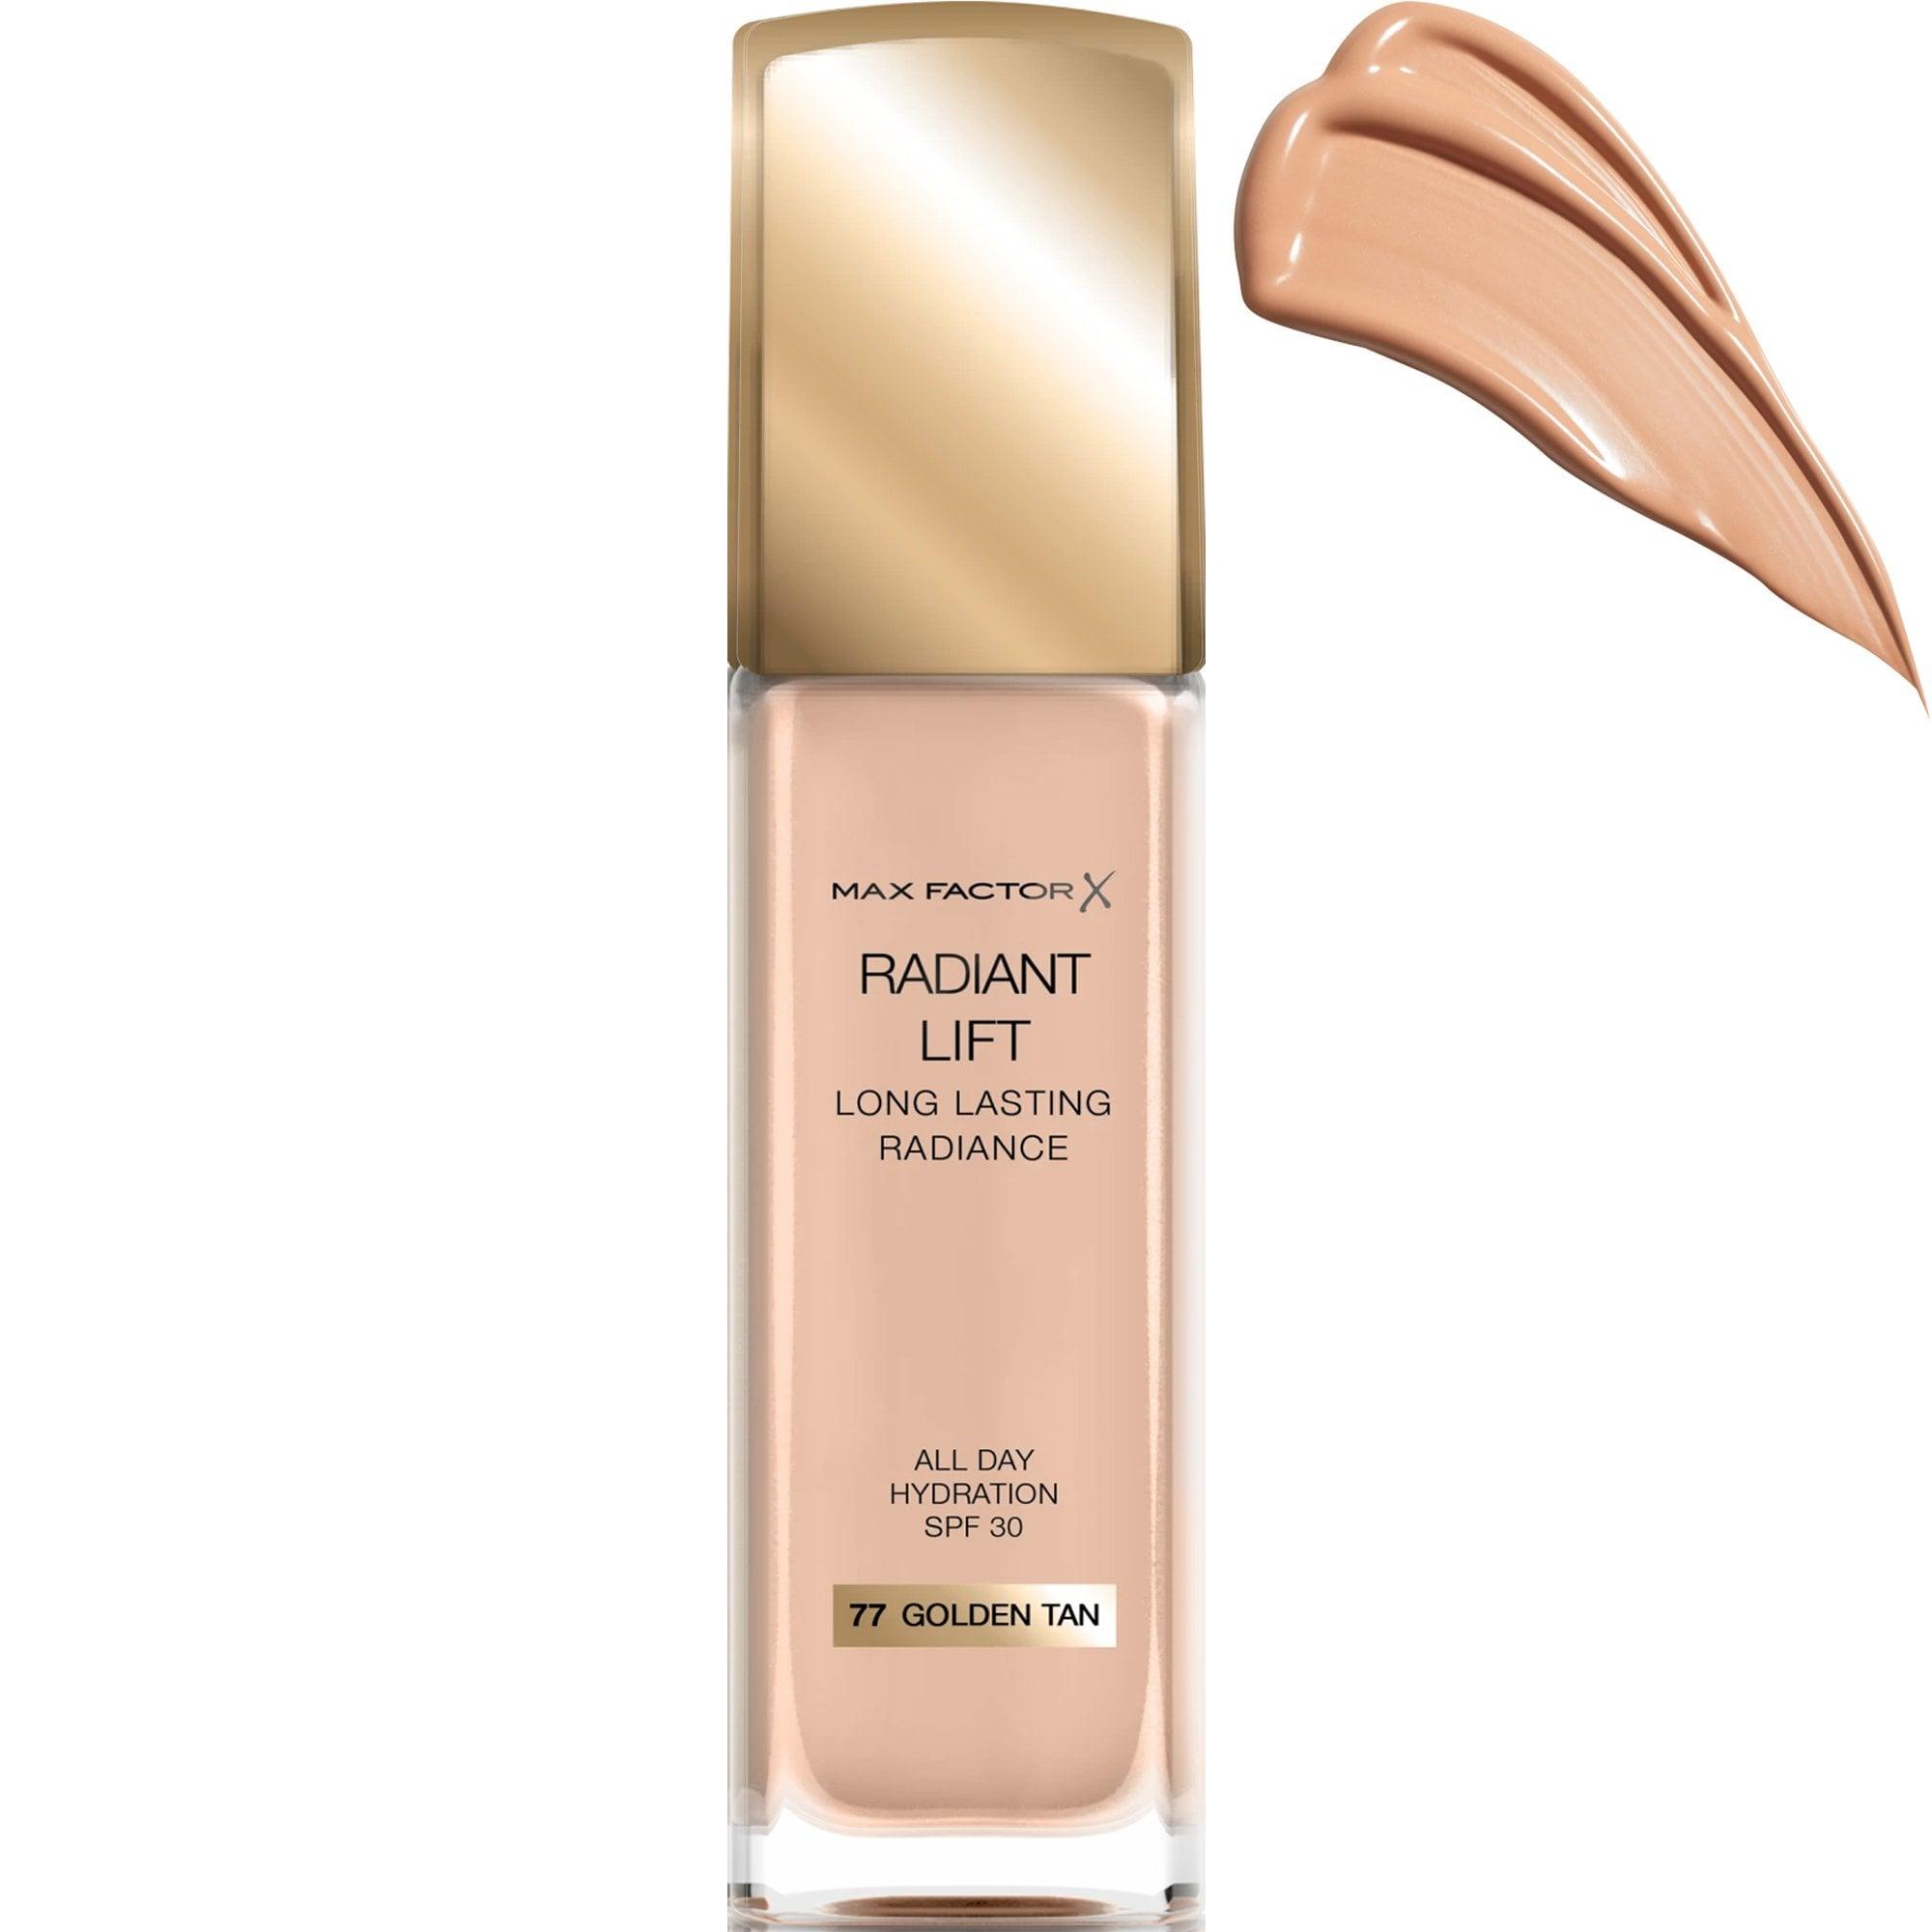 MAX FACTOR Radiant Lift - Long Lasting Radiance SPF30 - Golden Tan 77 -30ml (Non Carded) - www.indiancart.com.au - Foundations & Concealers - Max Factor - Max Factor